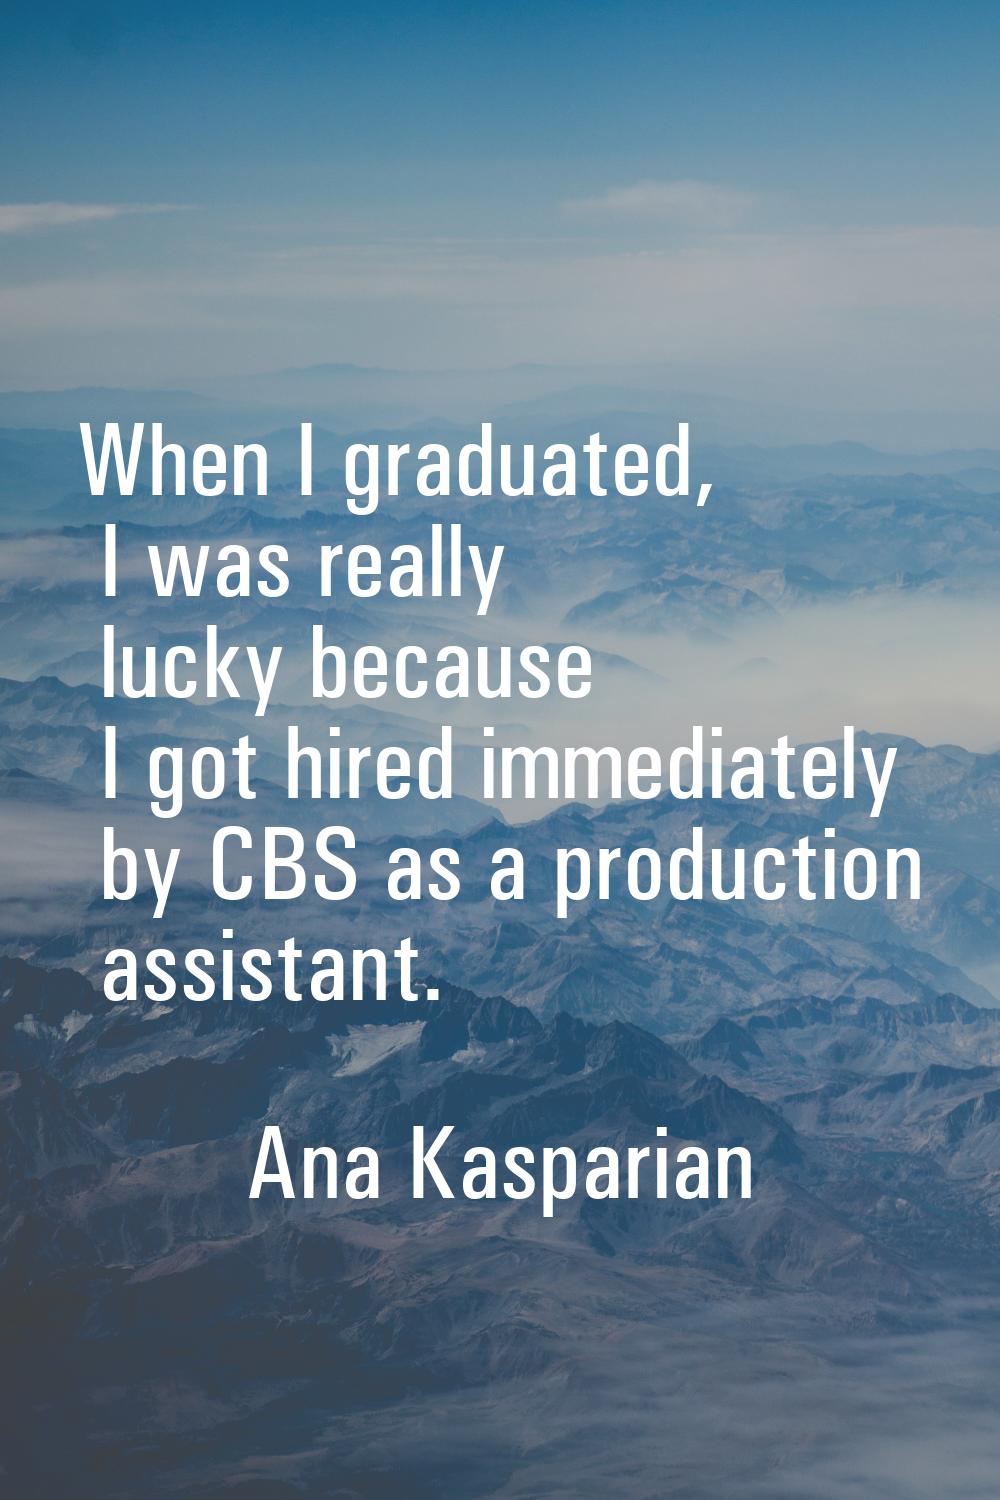 When I graduated, I was really lucky because I got hired immediately by CBS as a production assista